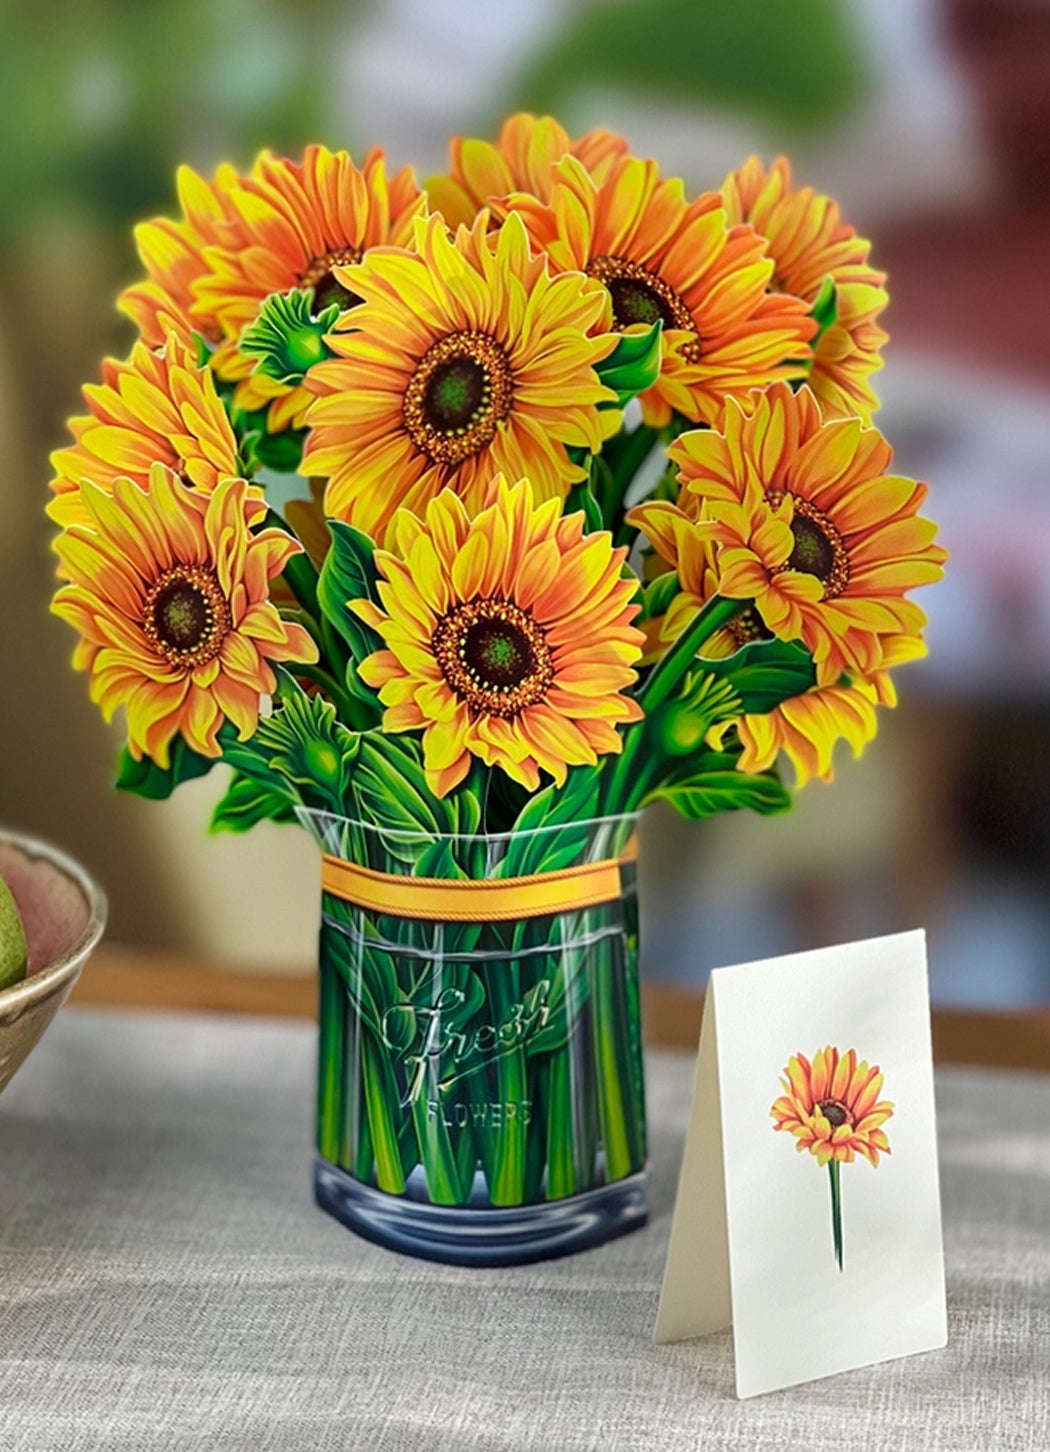 FreshCut Paper Sunflowers Pop-up Greeting Cards